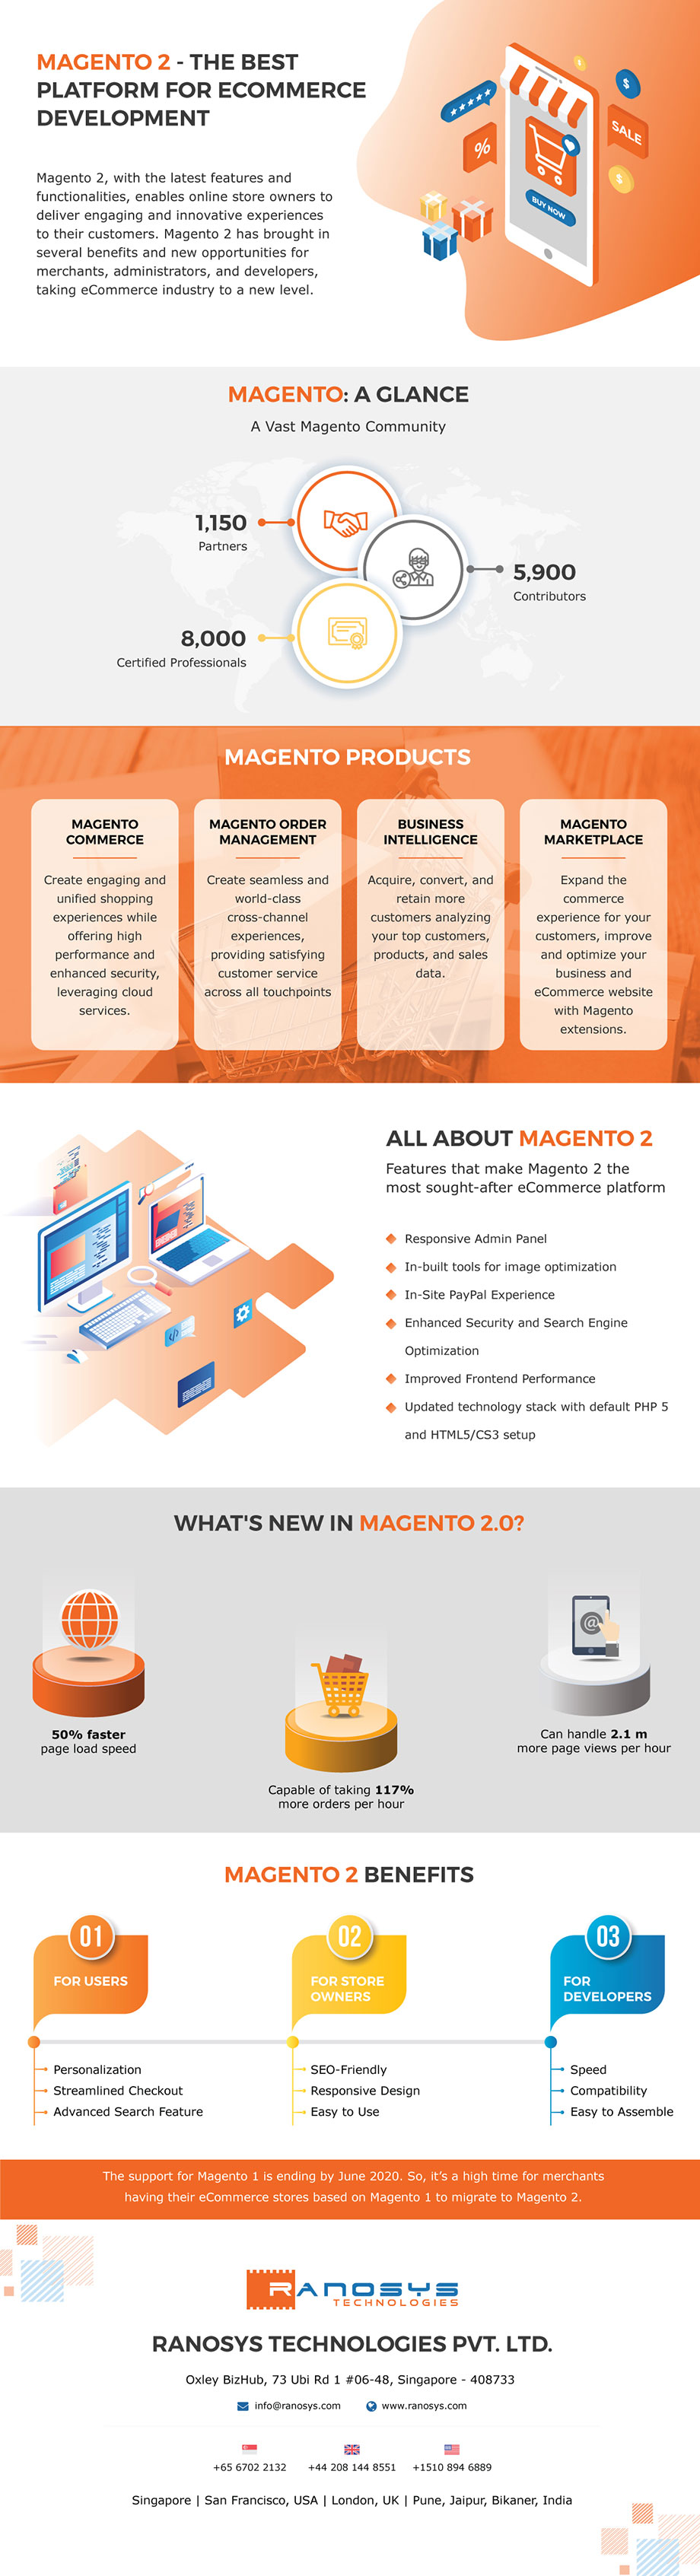 Magento 2 Migration: All you need to know (Infographic)